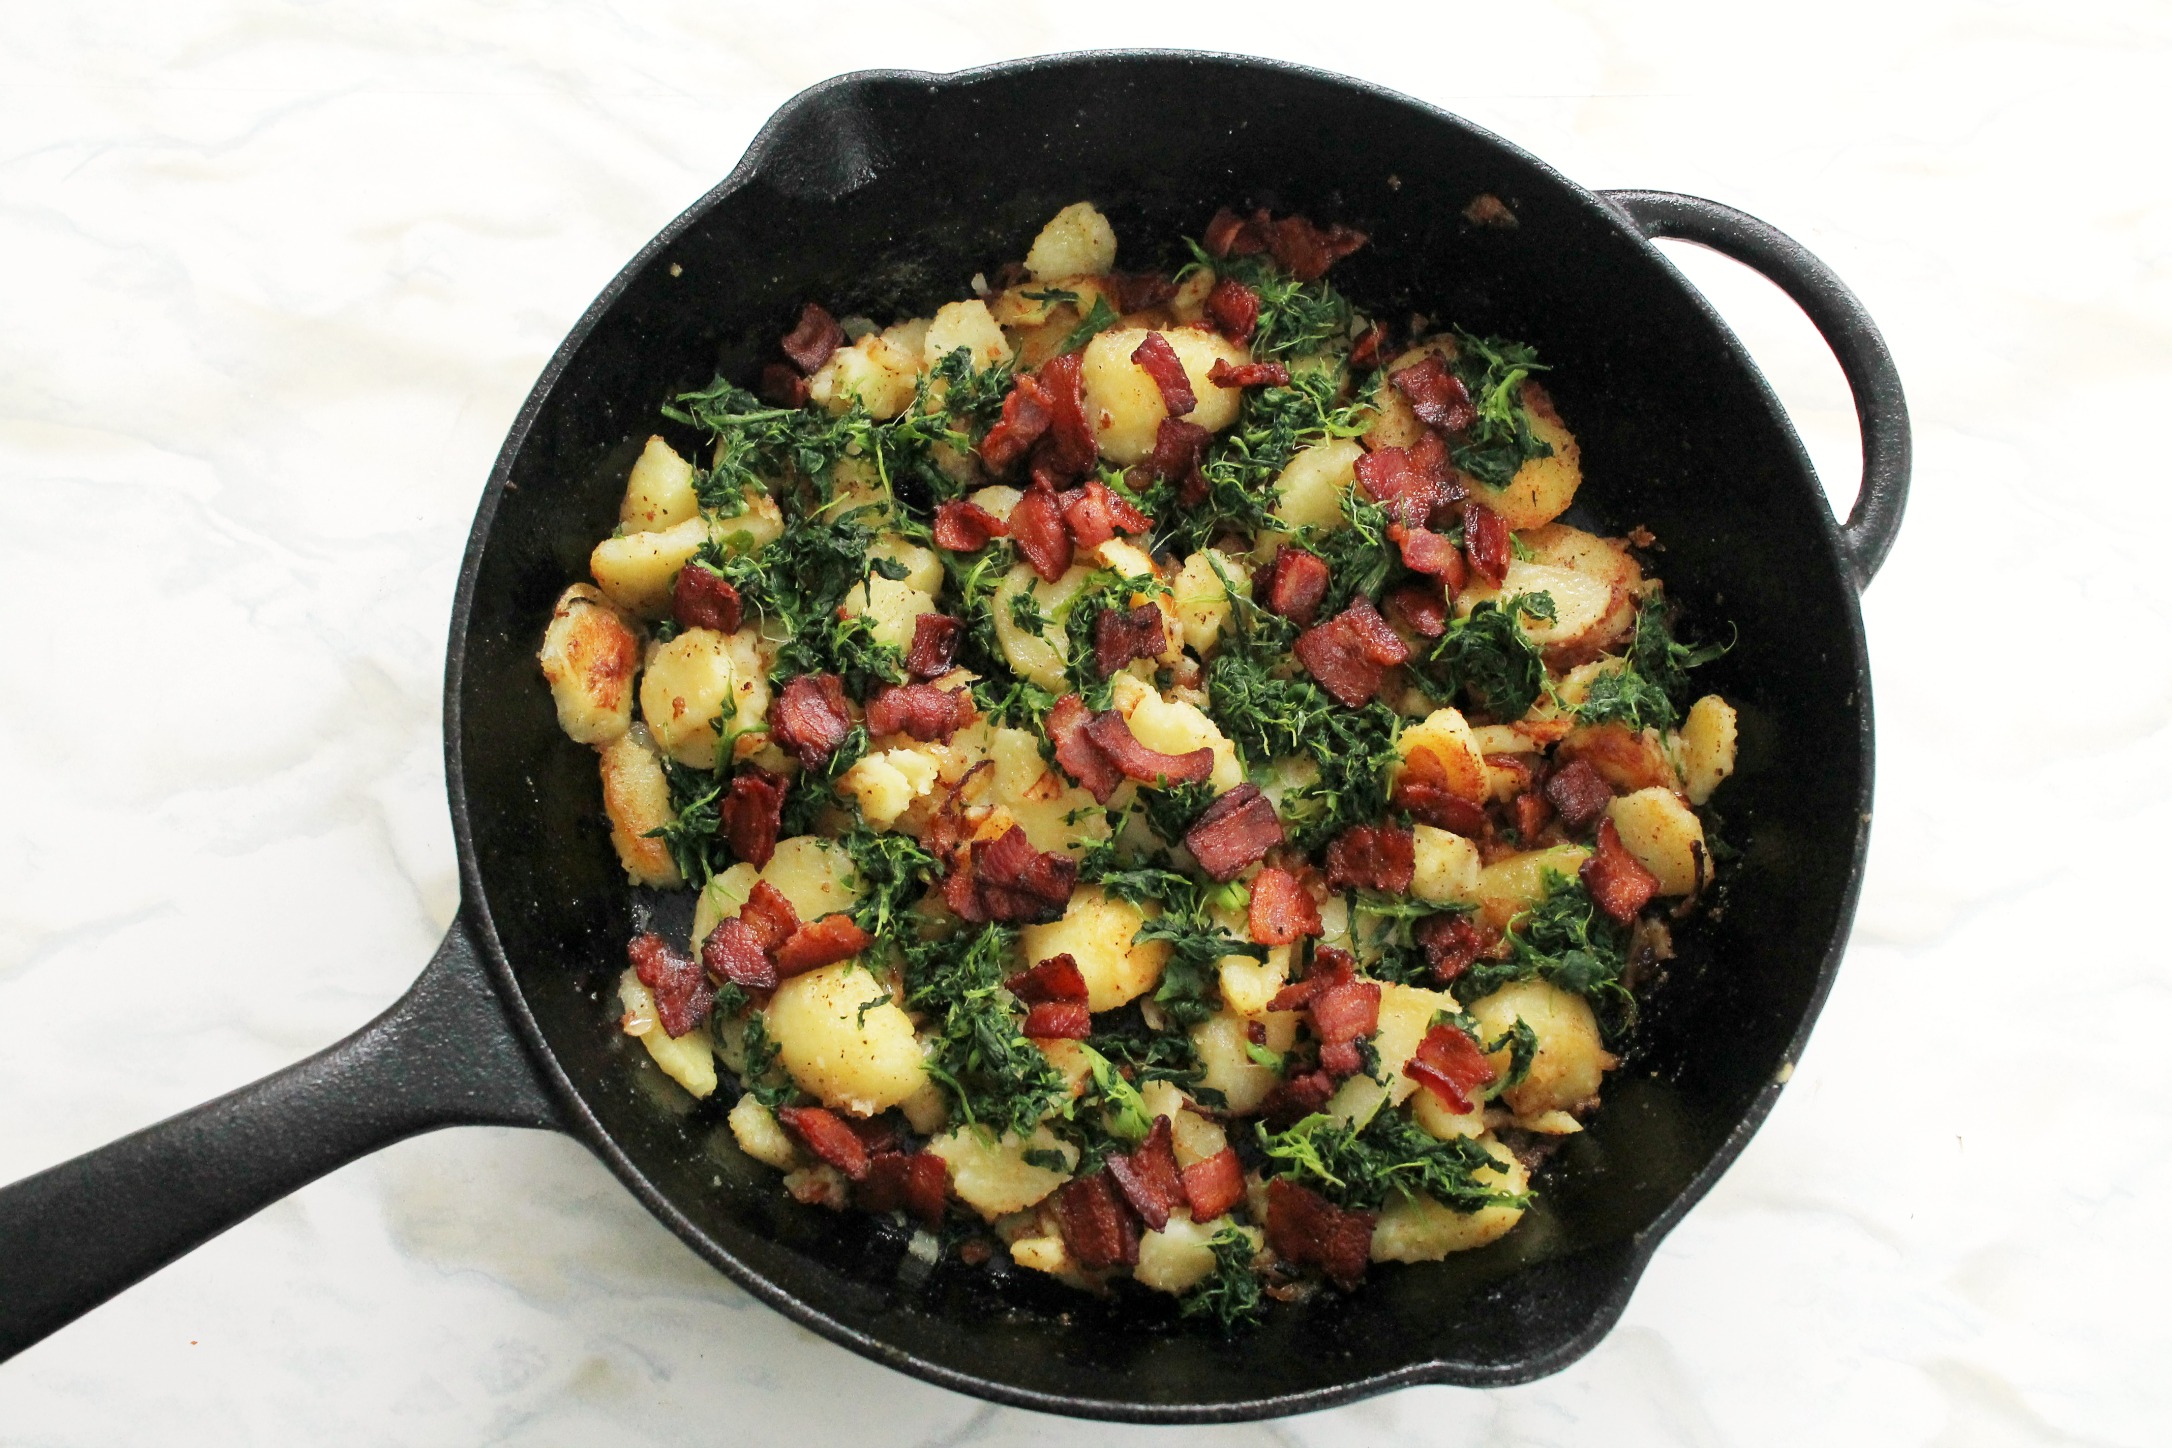 cast iron pan with cooked potatoes, bacon and spinach